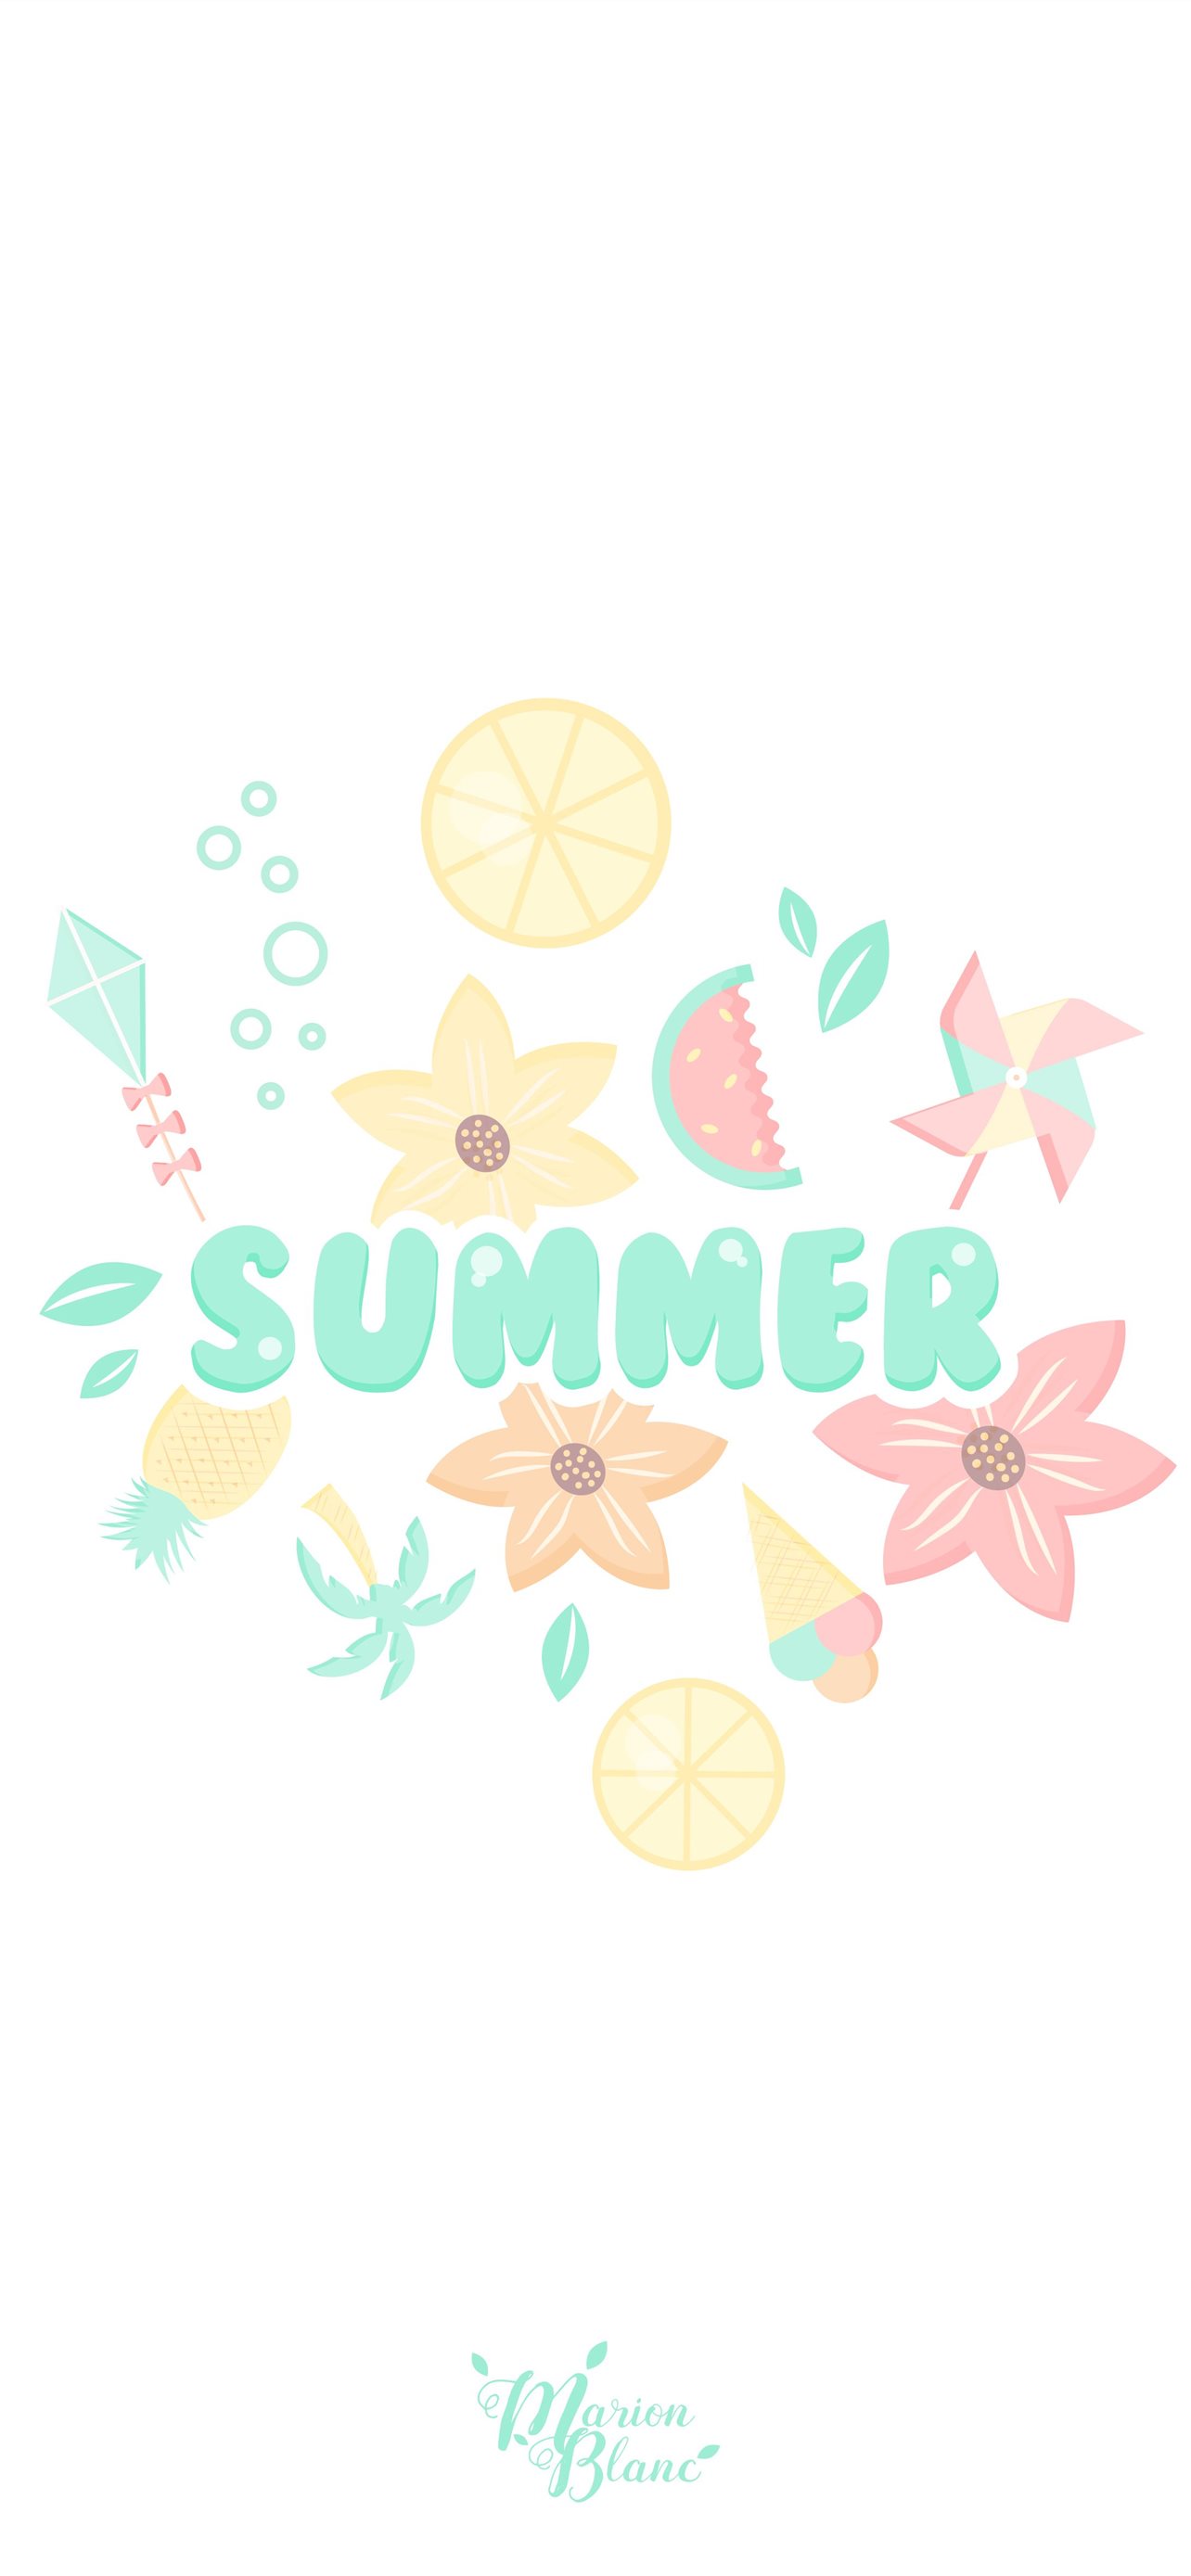 A poster that says summer on it - Pastel